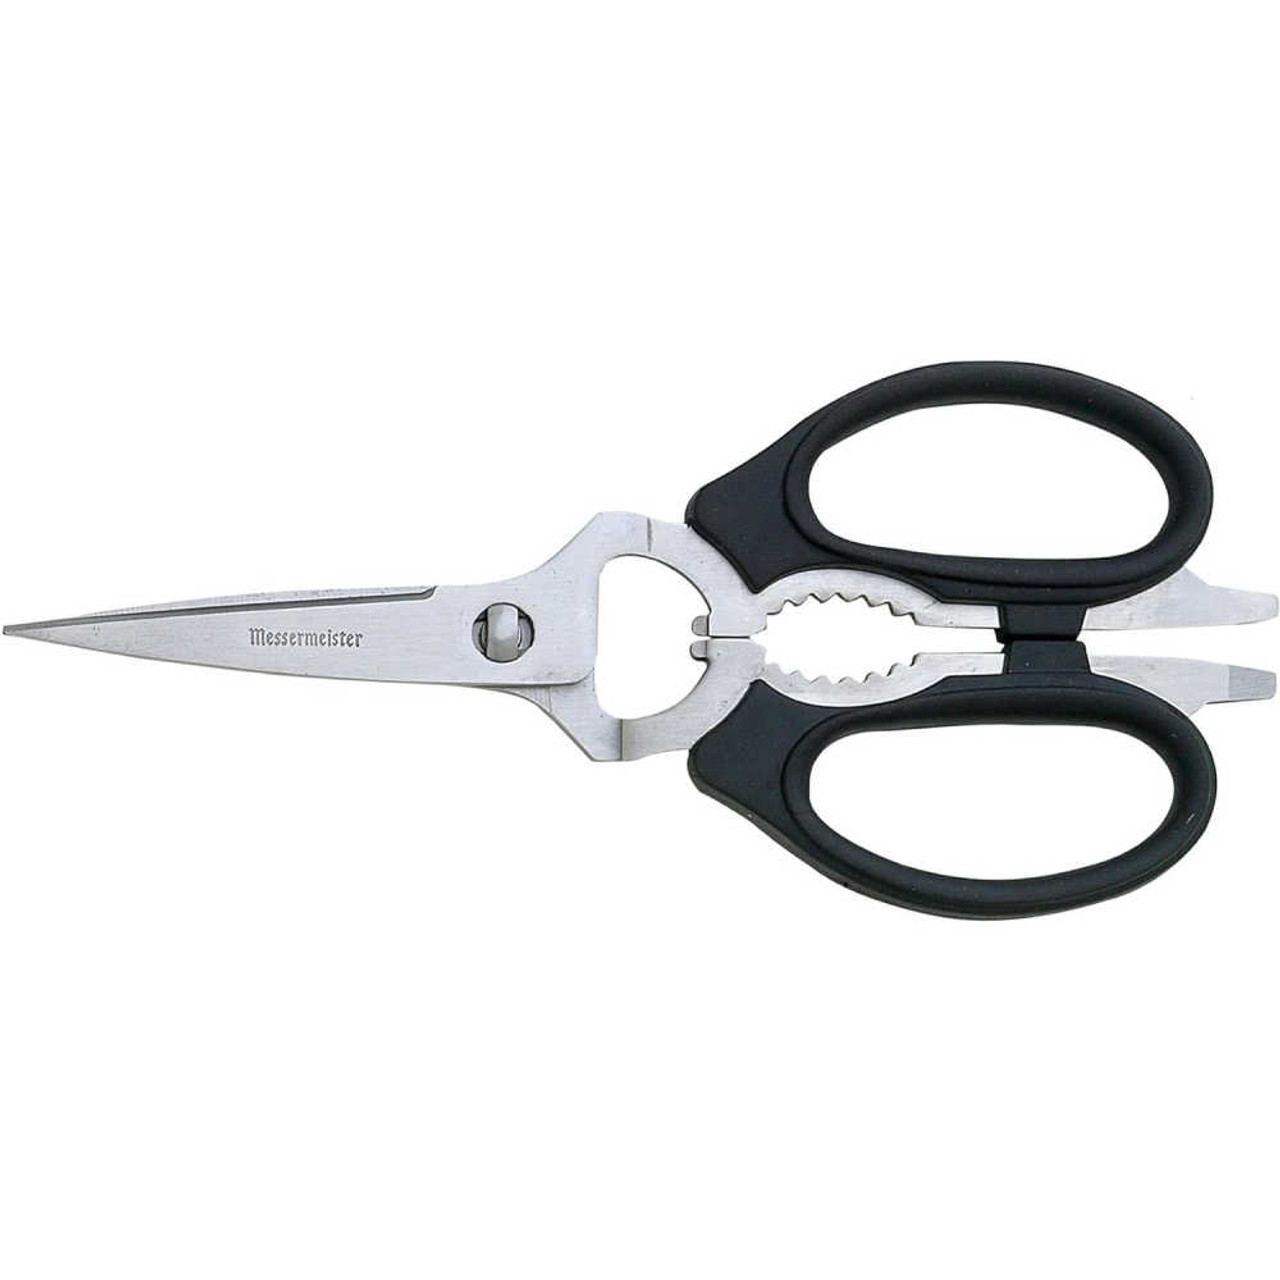 https://cdn11.bigcommerce.com/s-hccytny0od/images/stencil/1280x1280/products/5900/26534/Messermeister_Take-Apart_Kitchen_Scissors__57664.1700334479.jpg?c=2?imbypass=on